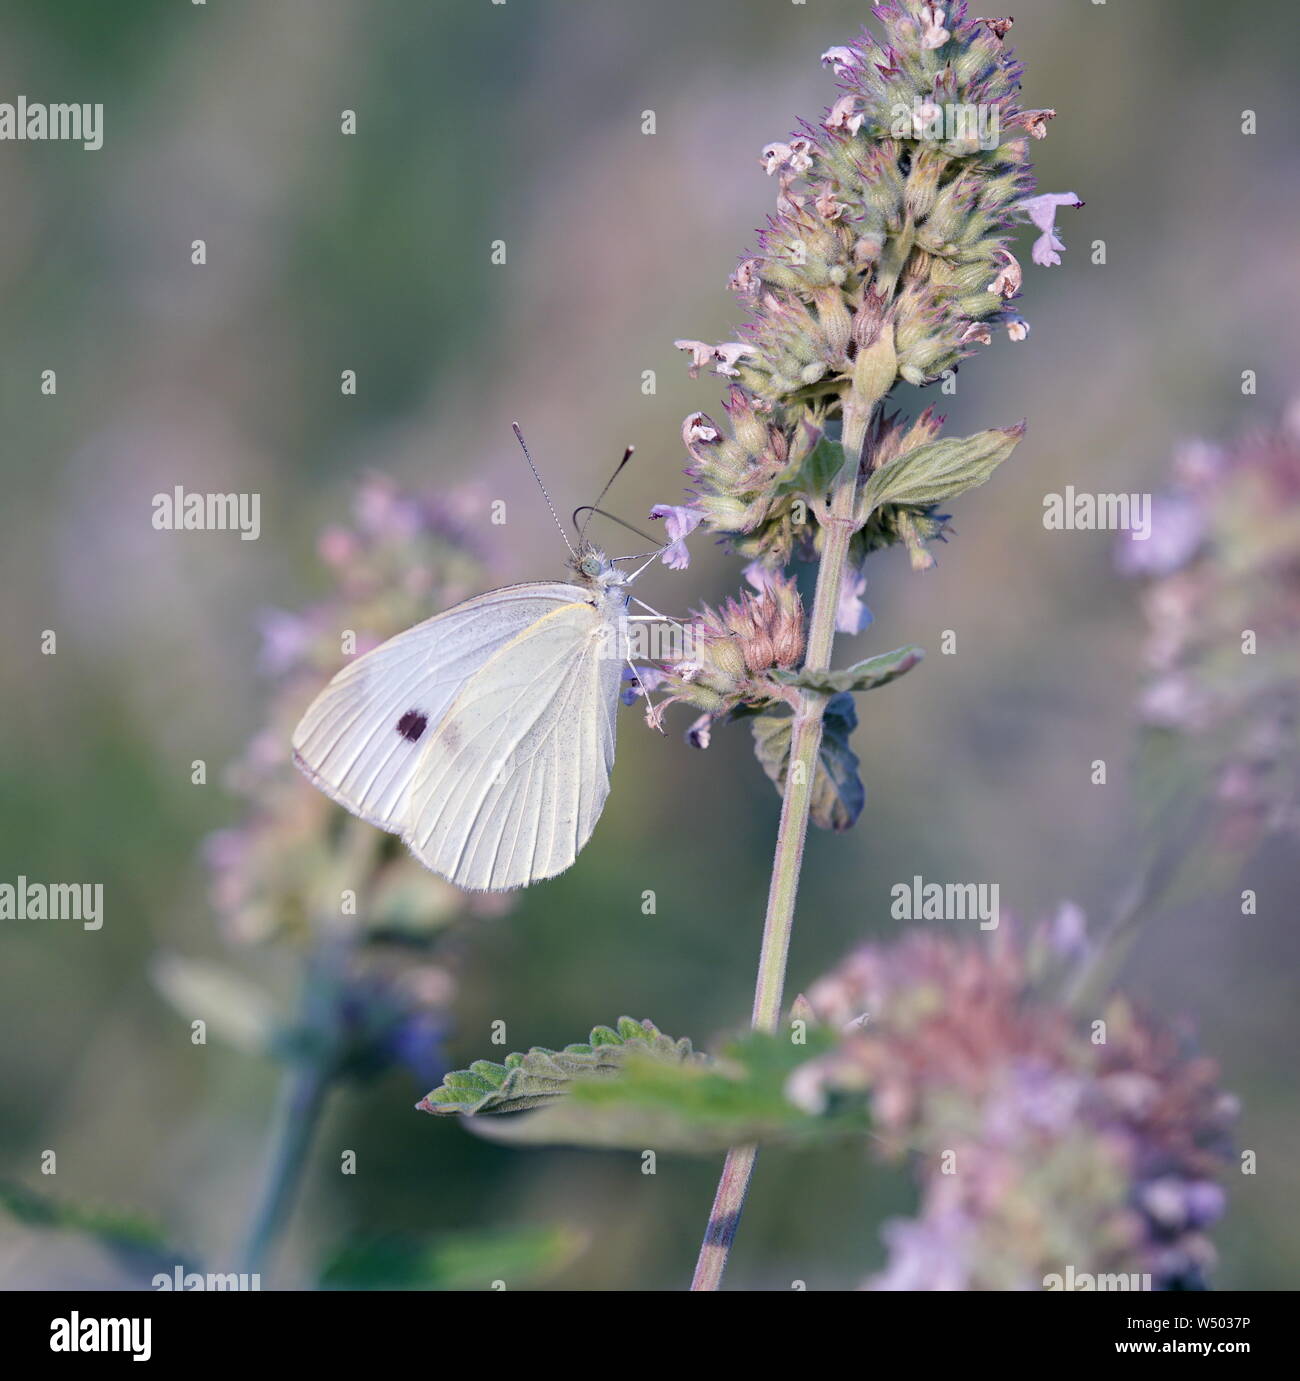 White butterfly searching collecting nectar from mint plant flowers Stock Photo